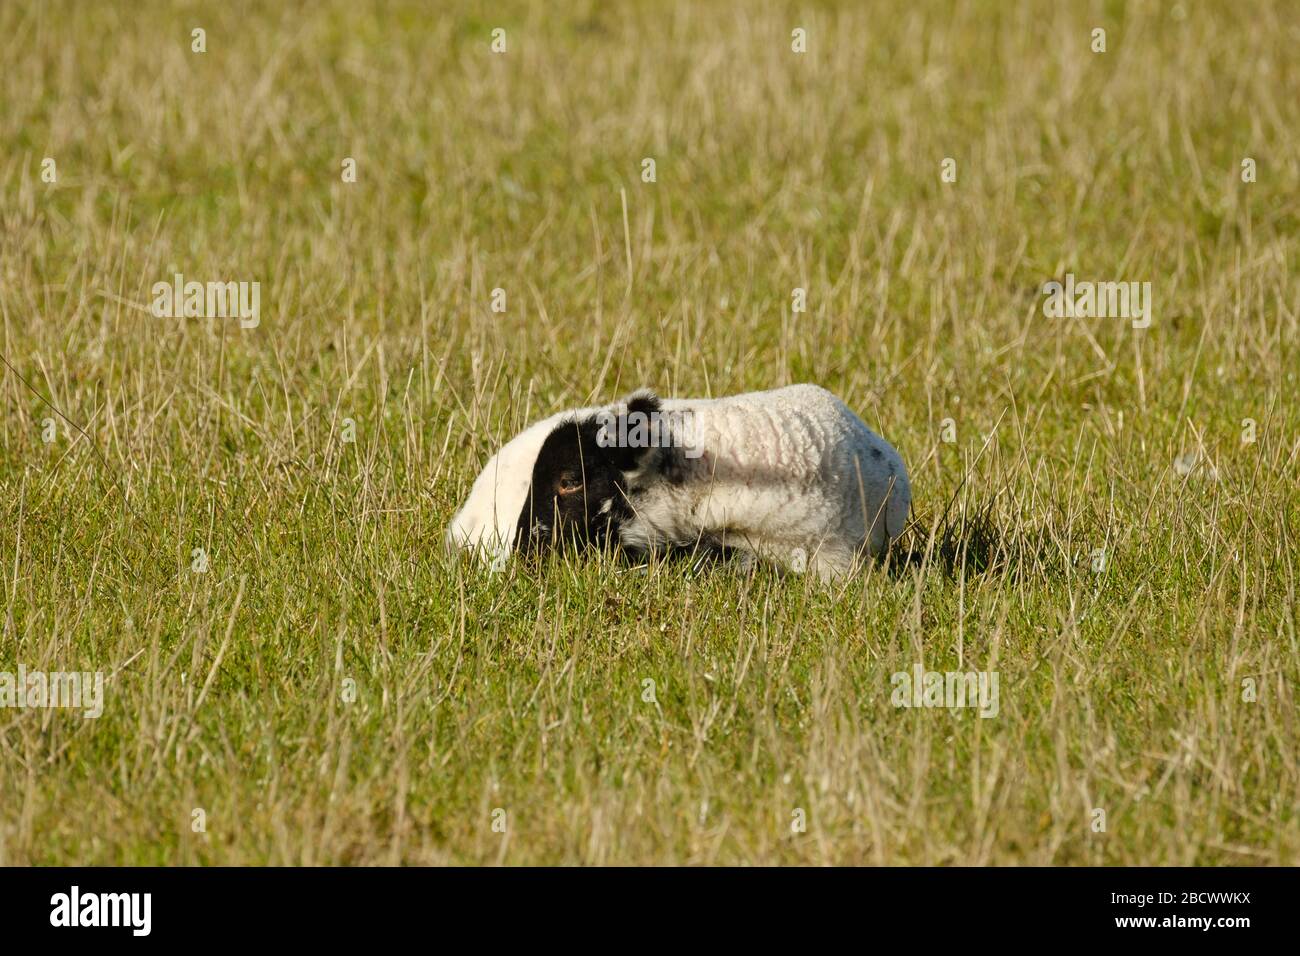 A young lamb sleeping in a field in Warwickshire, UK Stock Photo